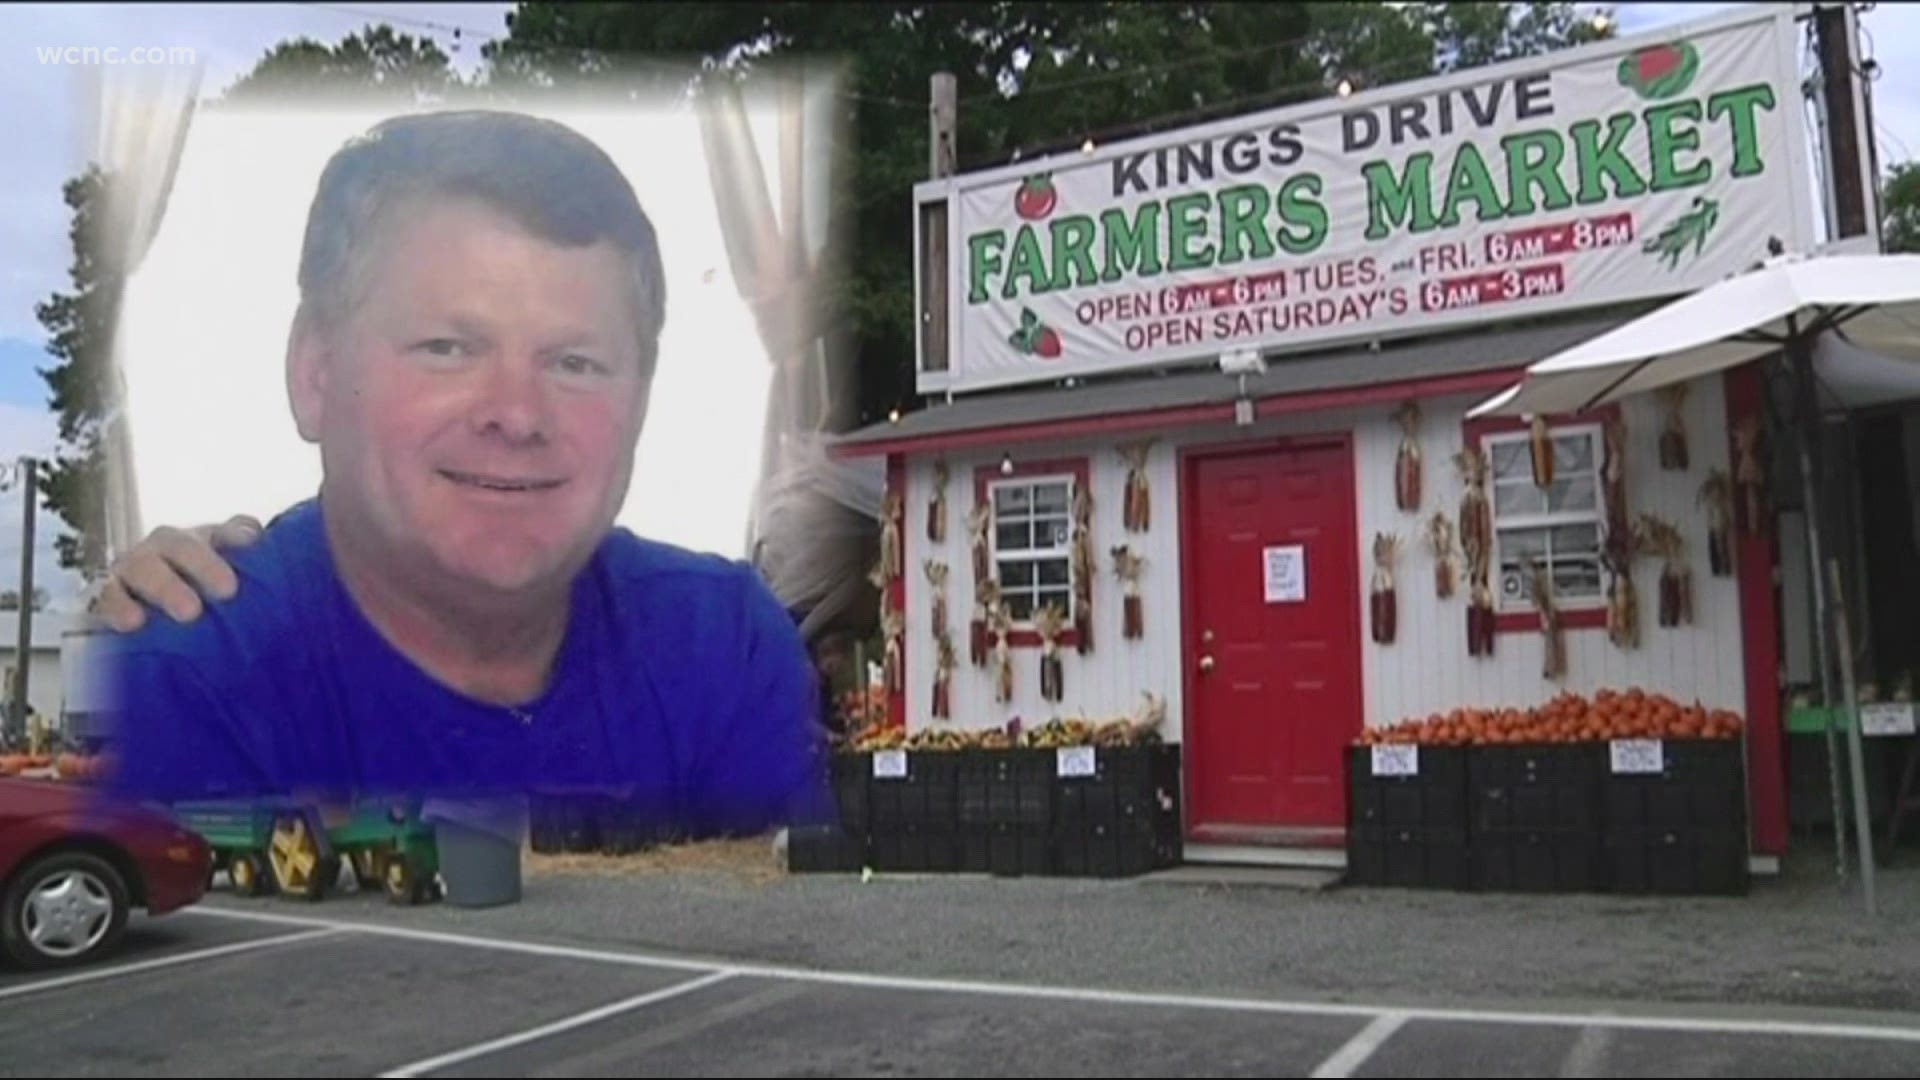 The Charlotte area is mourning the loss of the beloved part-owner of Kings Drive Farmers Market, David Simpson, who died from COVID-19.